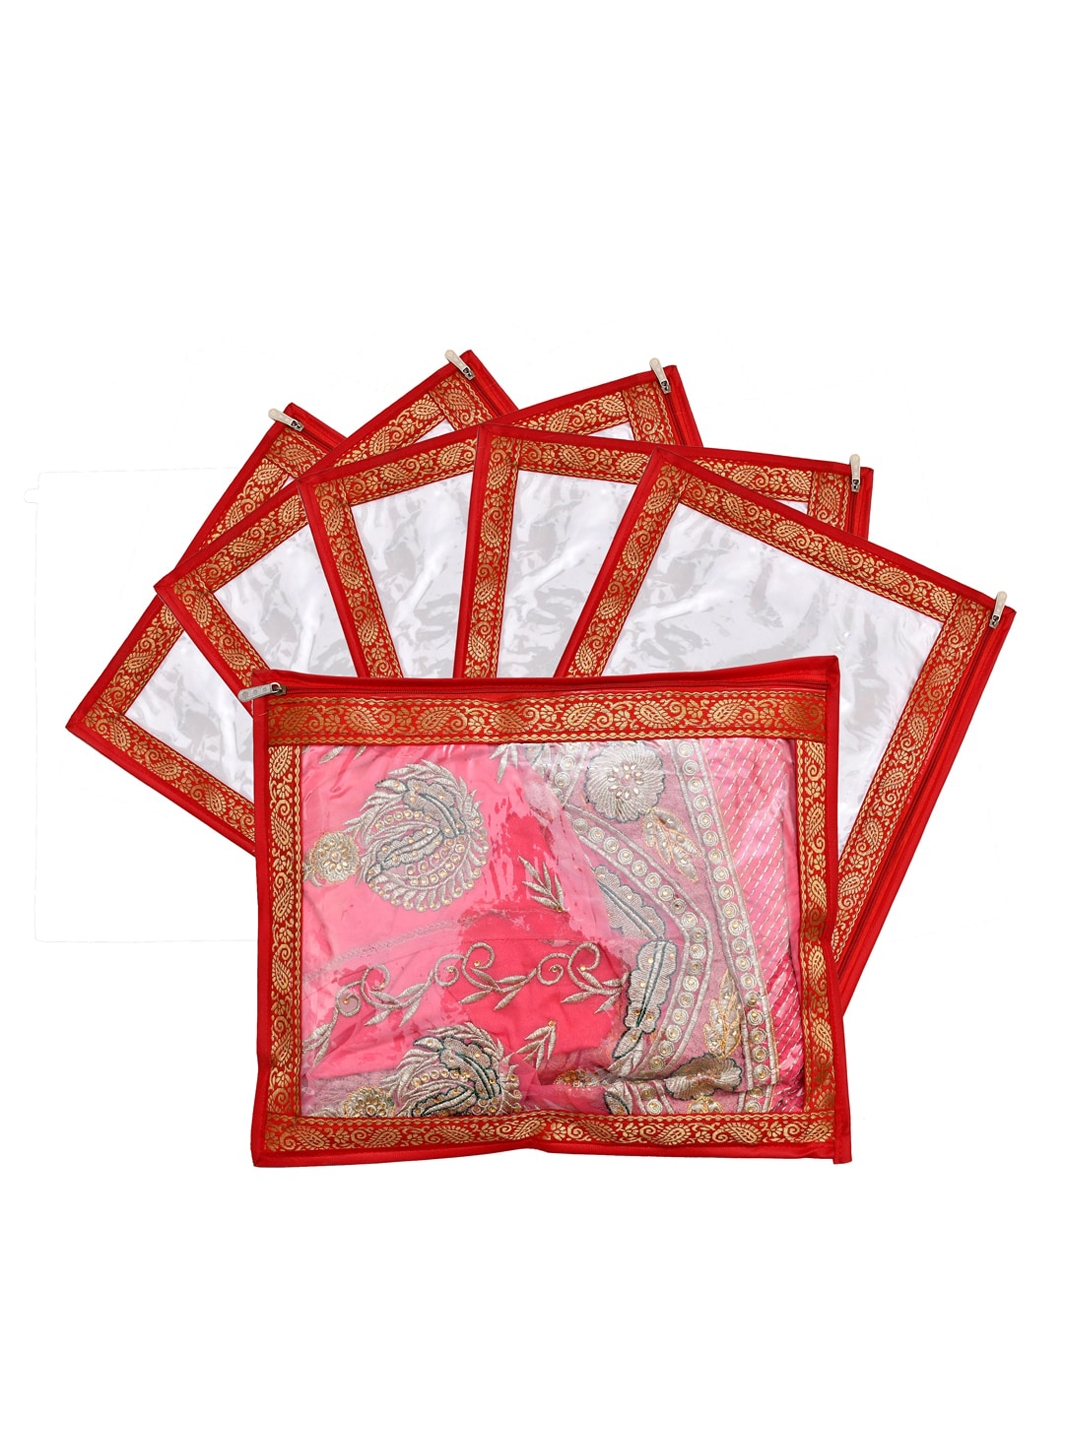 Kuber Industries Set Of 6 Red   Transparent Solid Single Packing Saree Cover Organizers